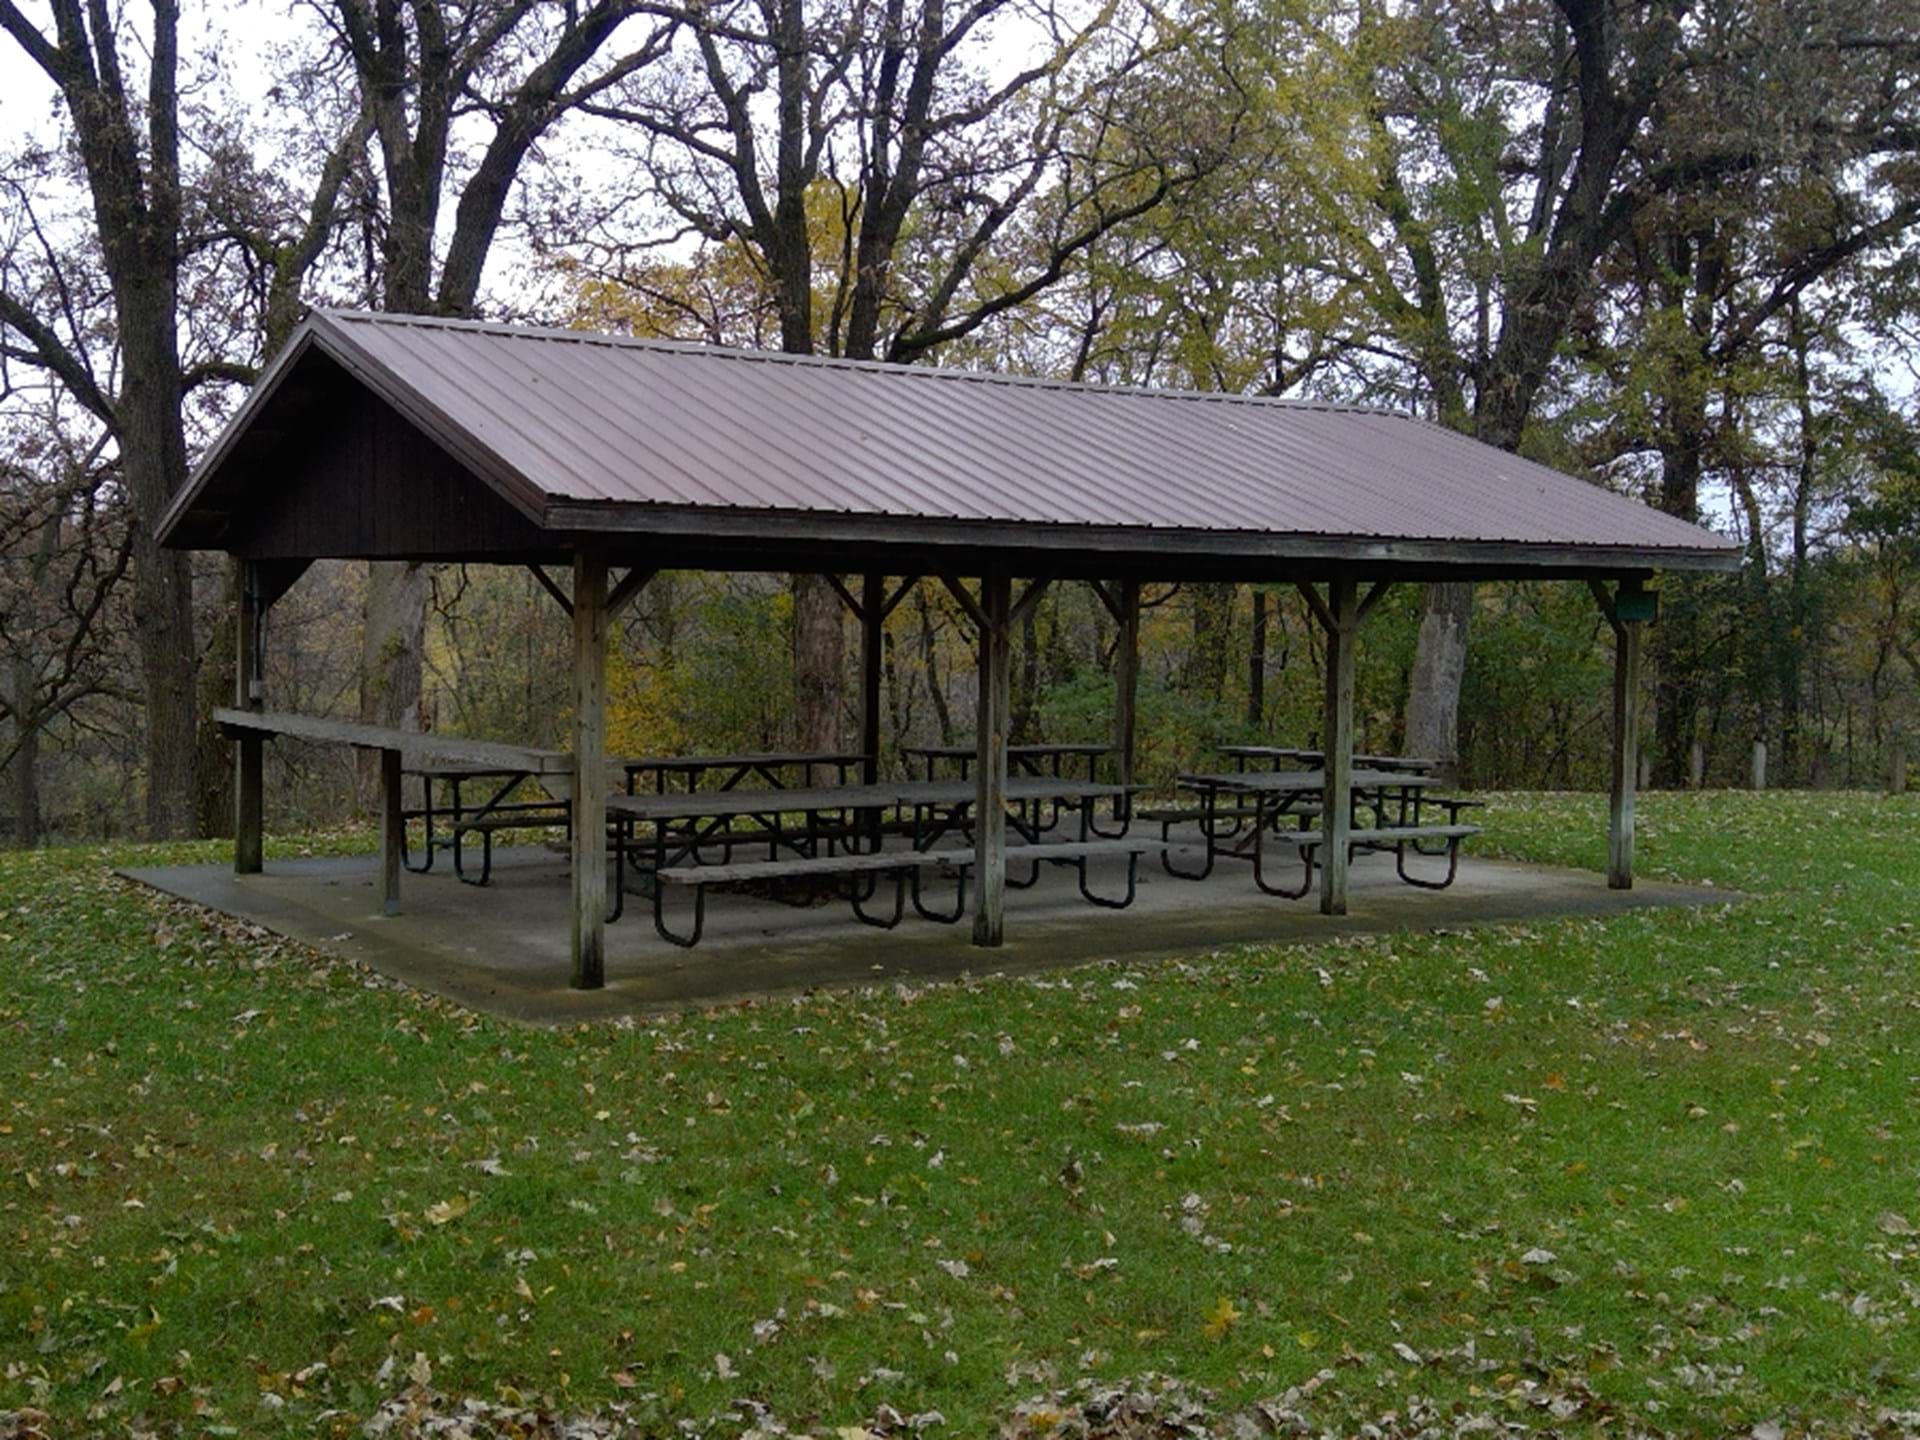 Shelter at North Woods Park